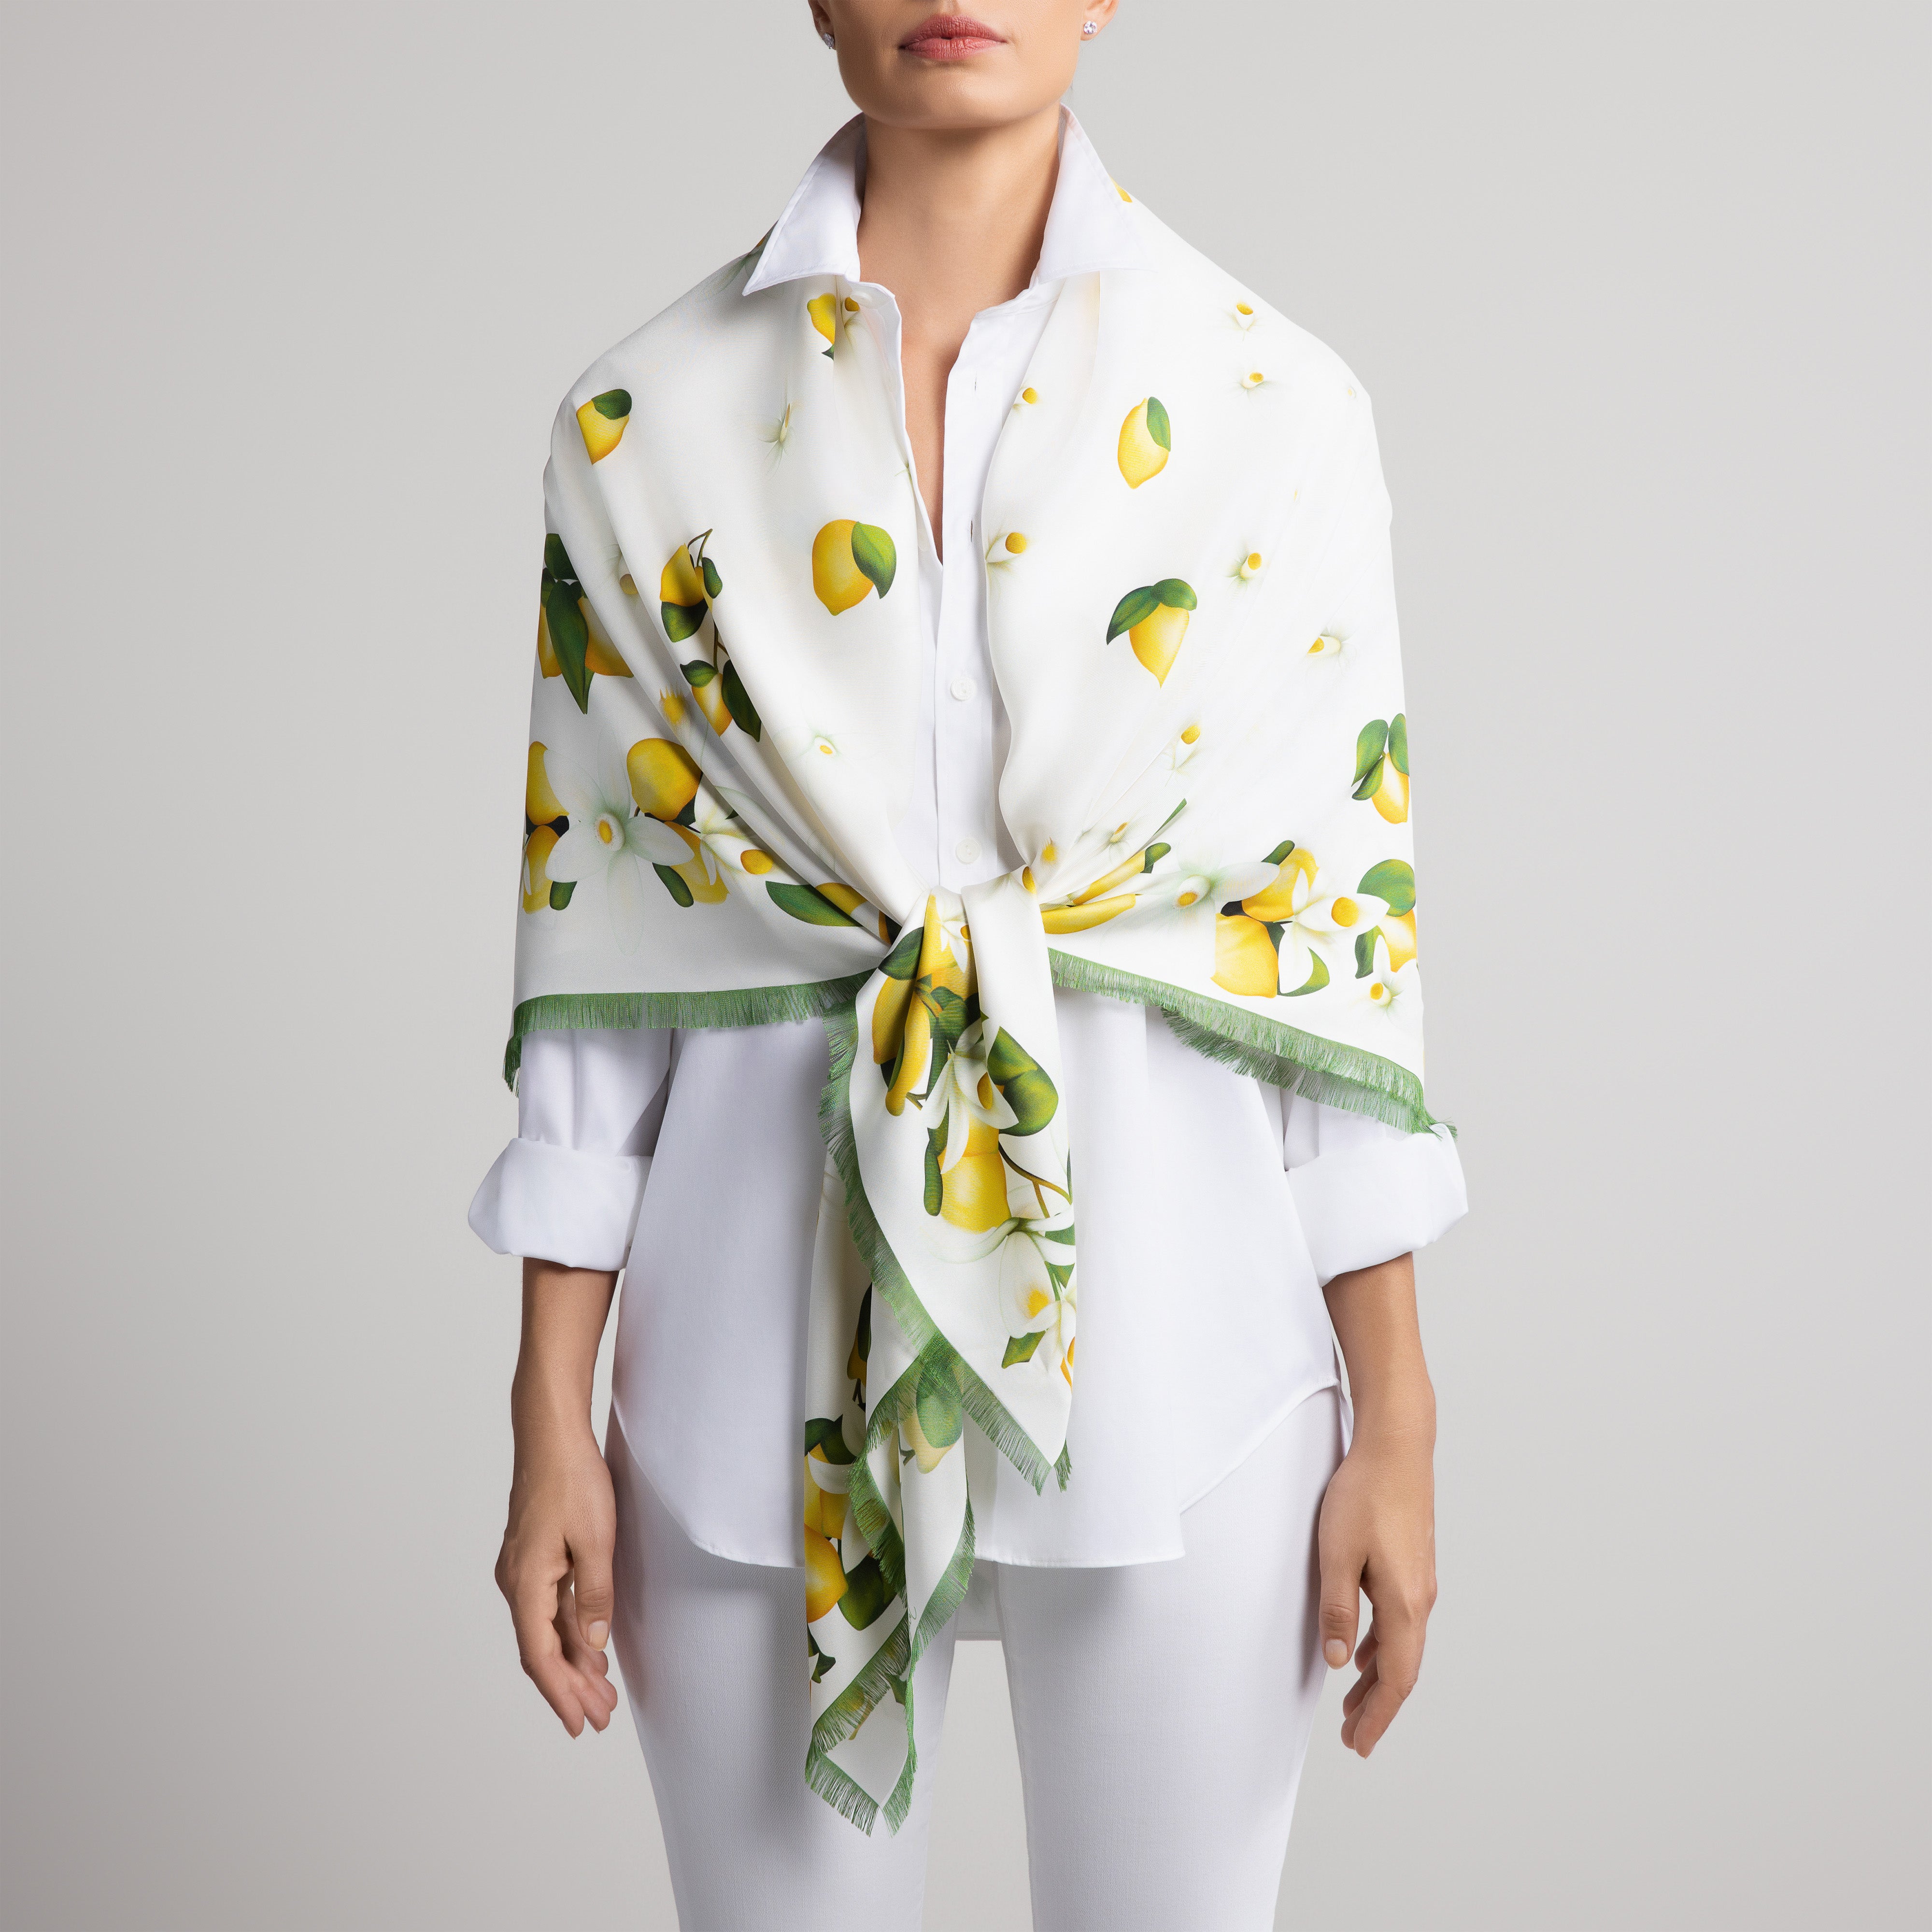 Capri Grande Silk Scarf in White with Hand-Feathered Edges